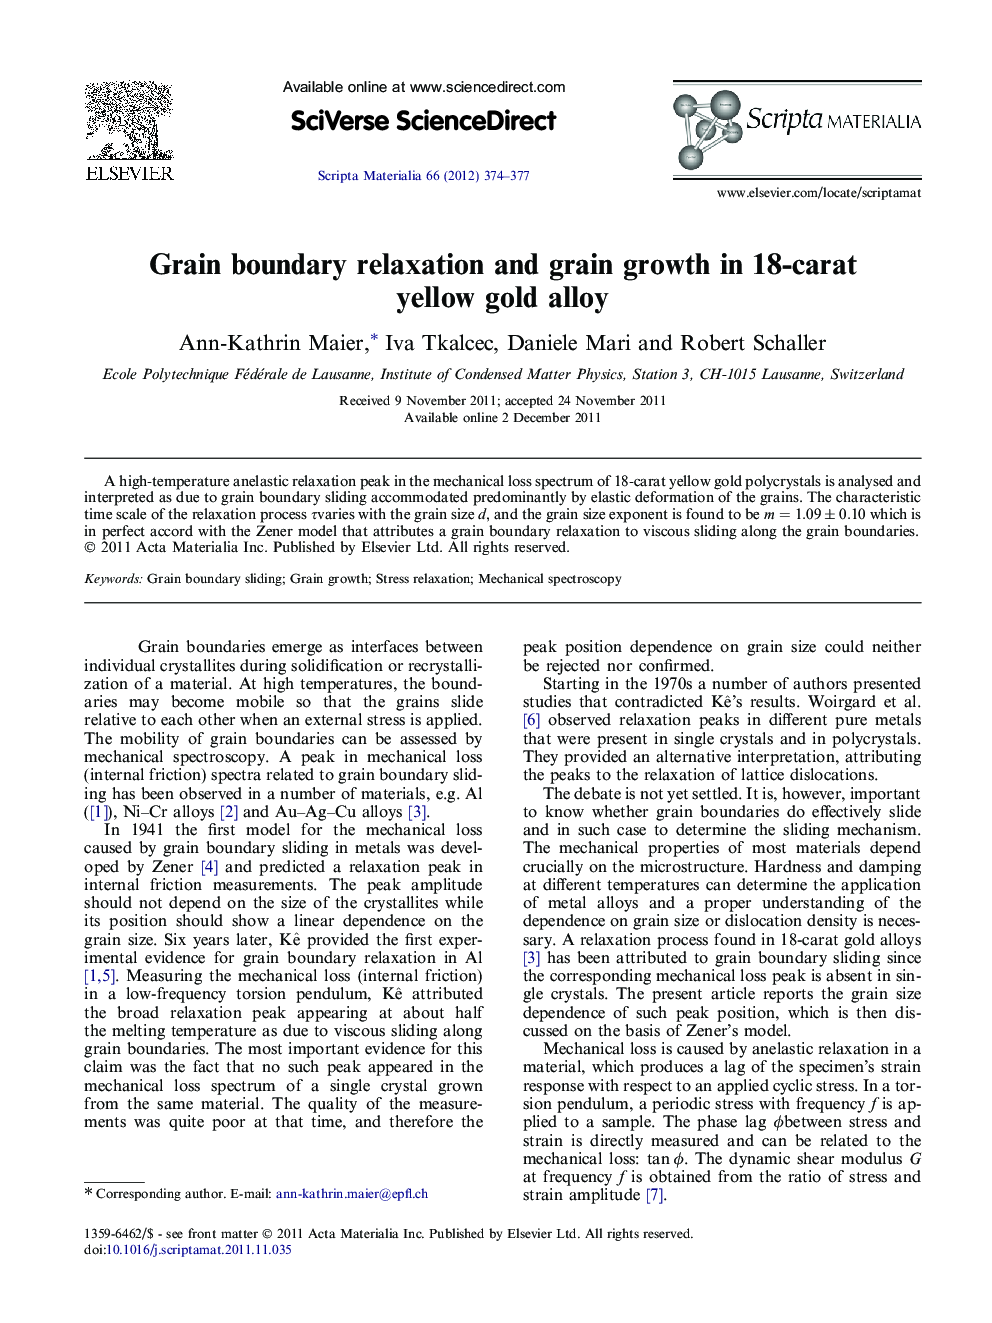 Grain boundary relaxation and grain growth in 18-carat yellow gold alloy